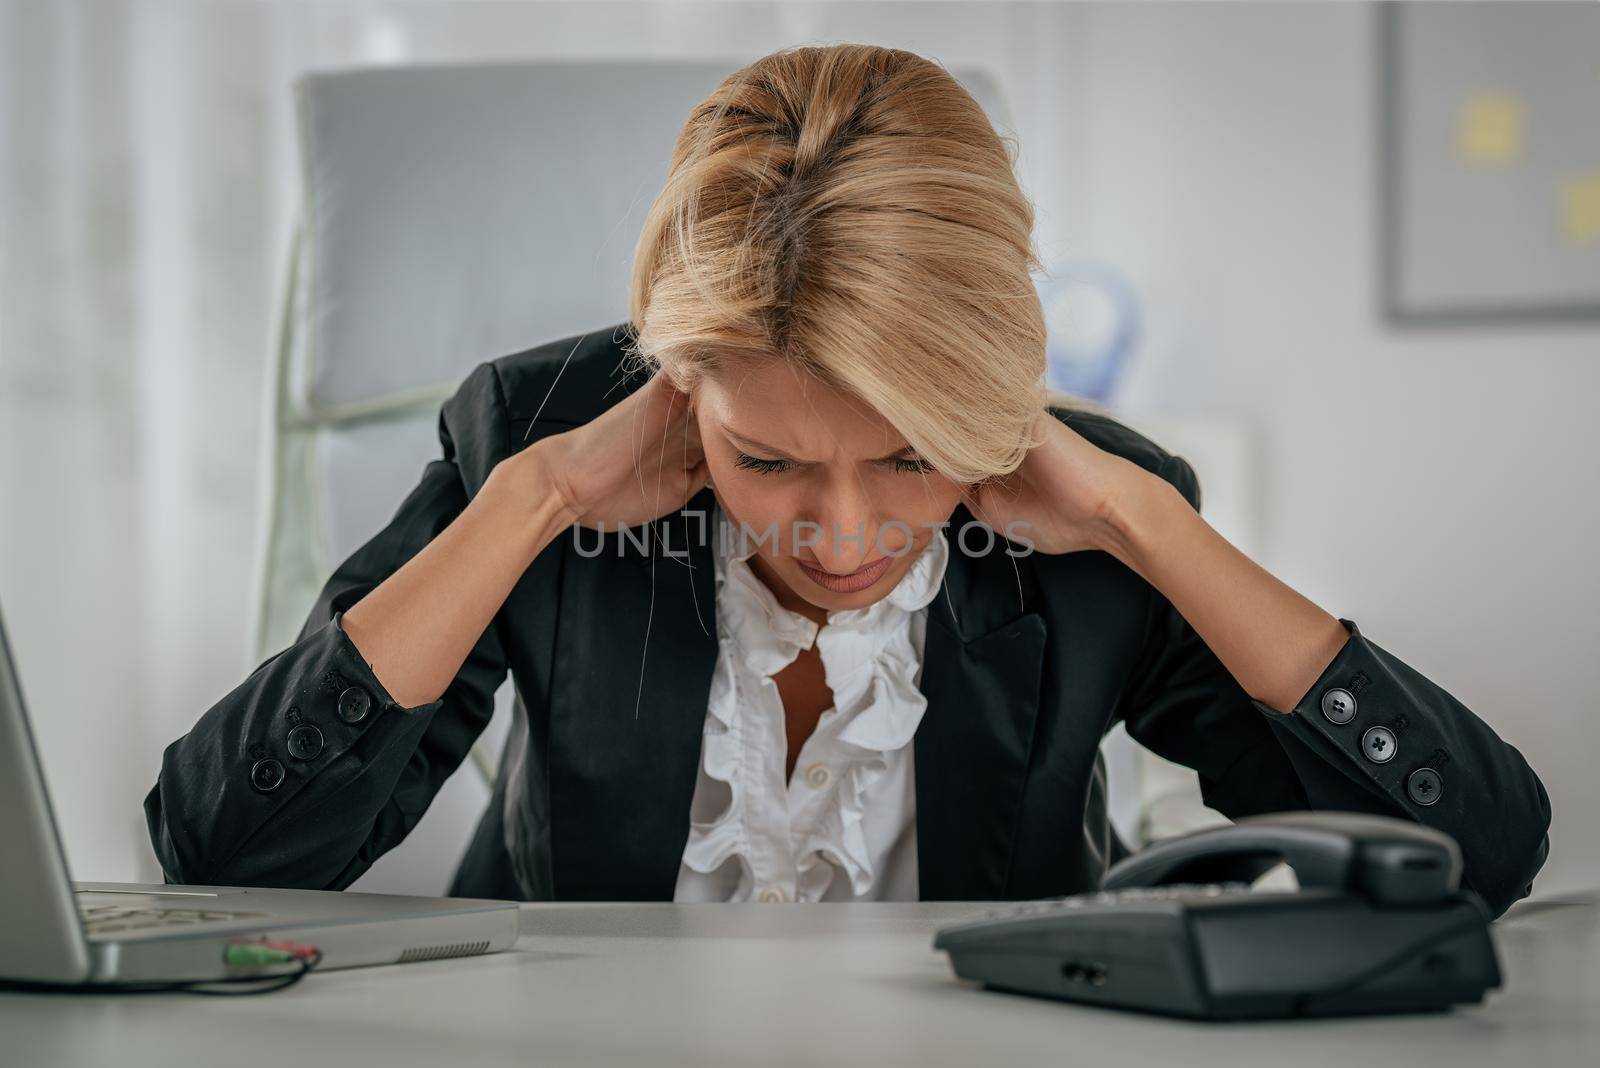 Young tired businesswoman with headache holding her hands on the neck with a pained expression on her face.